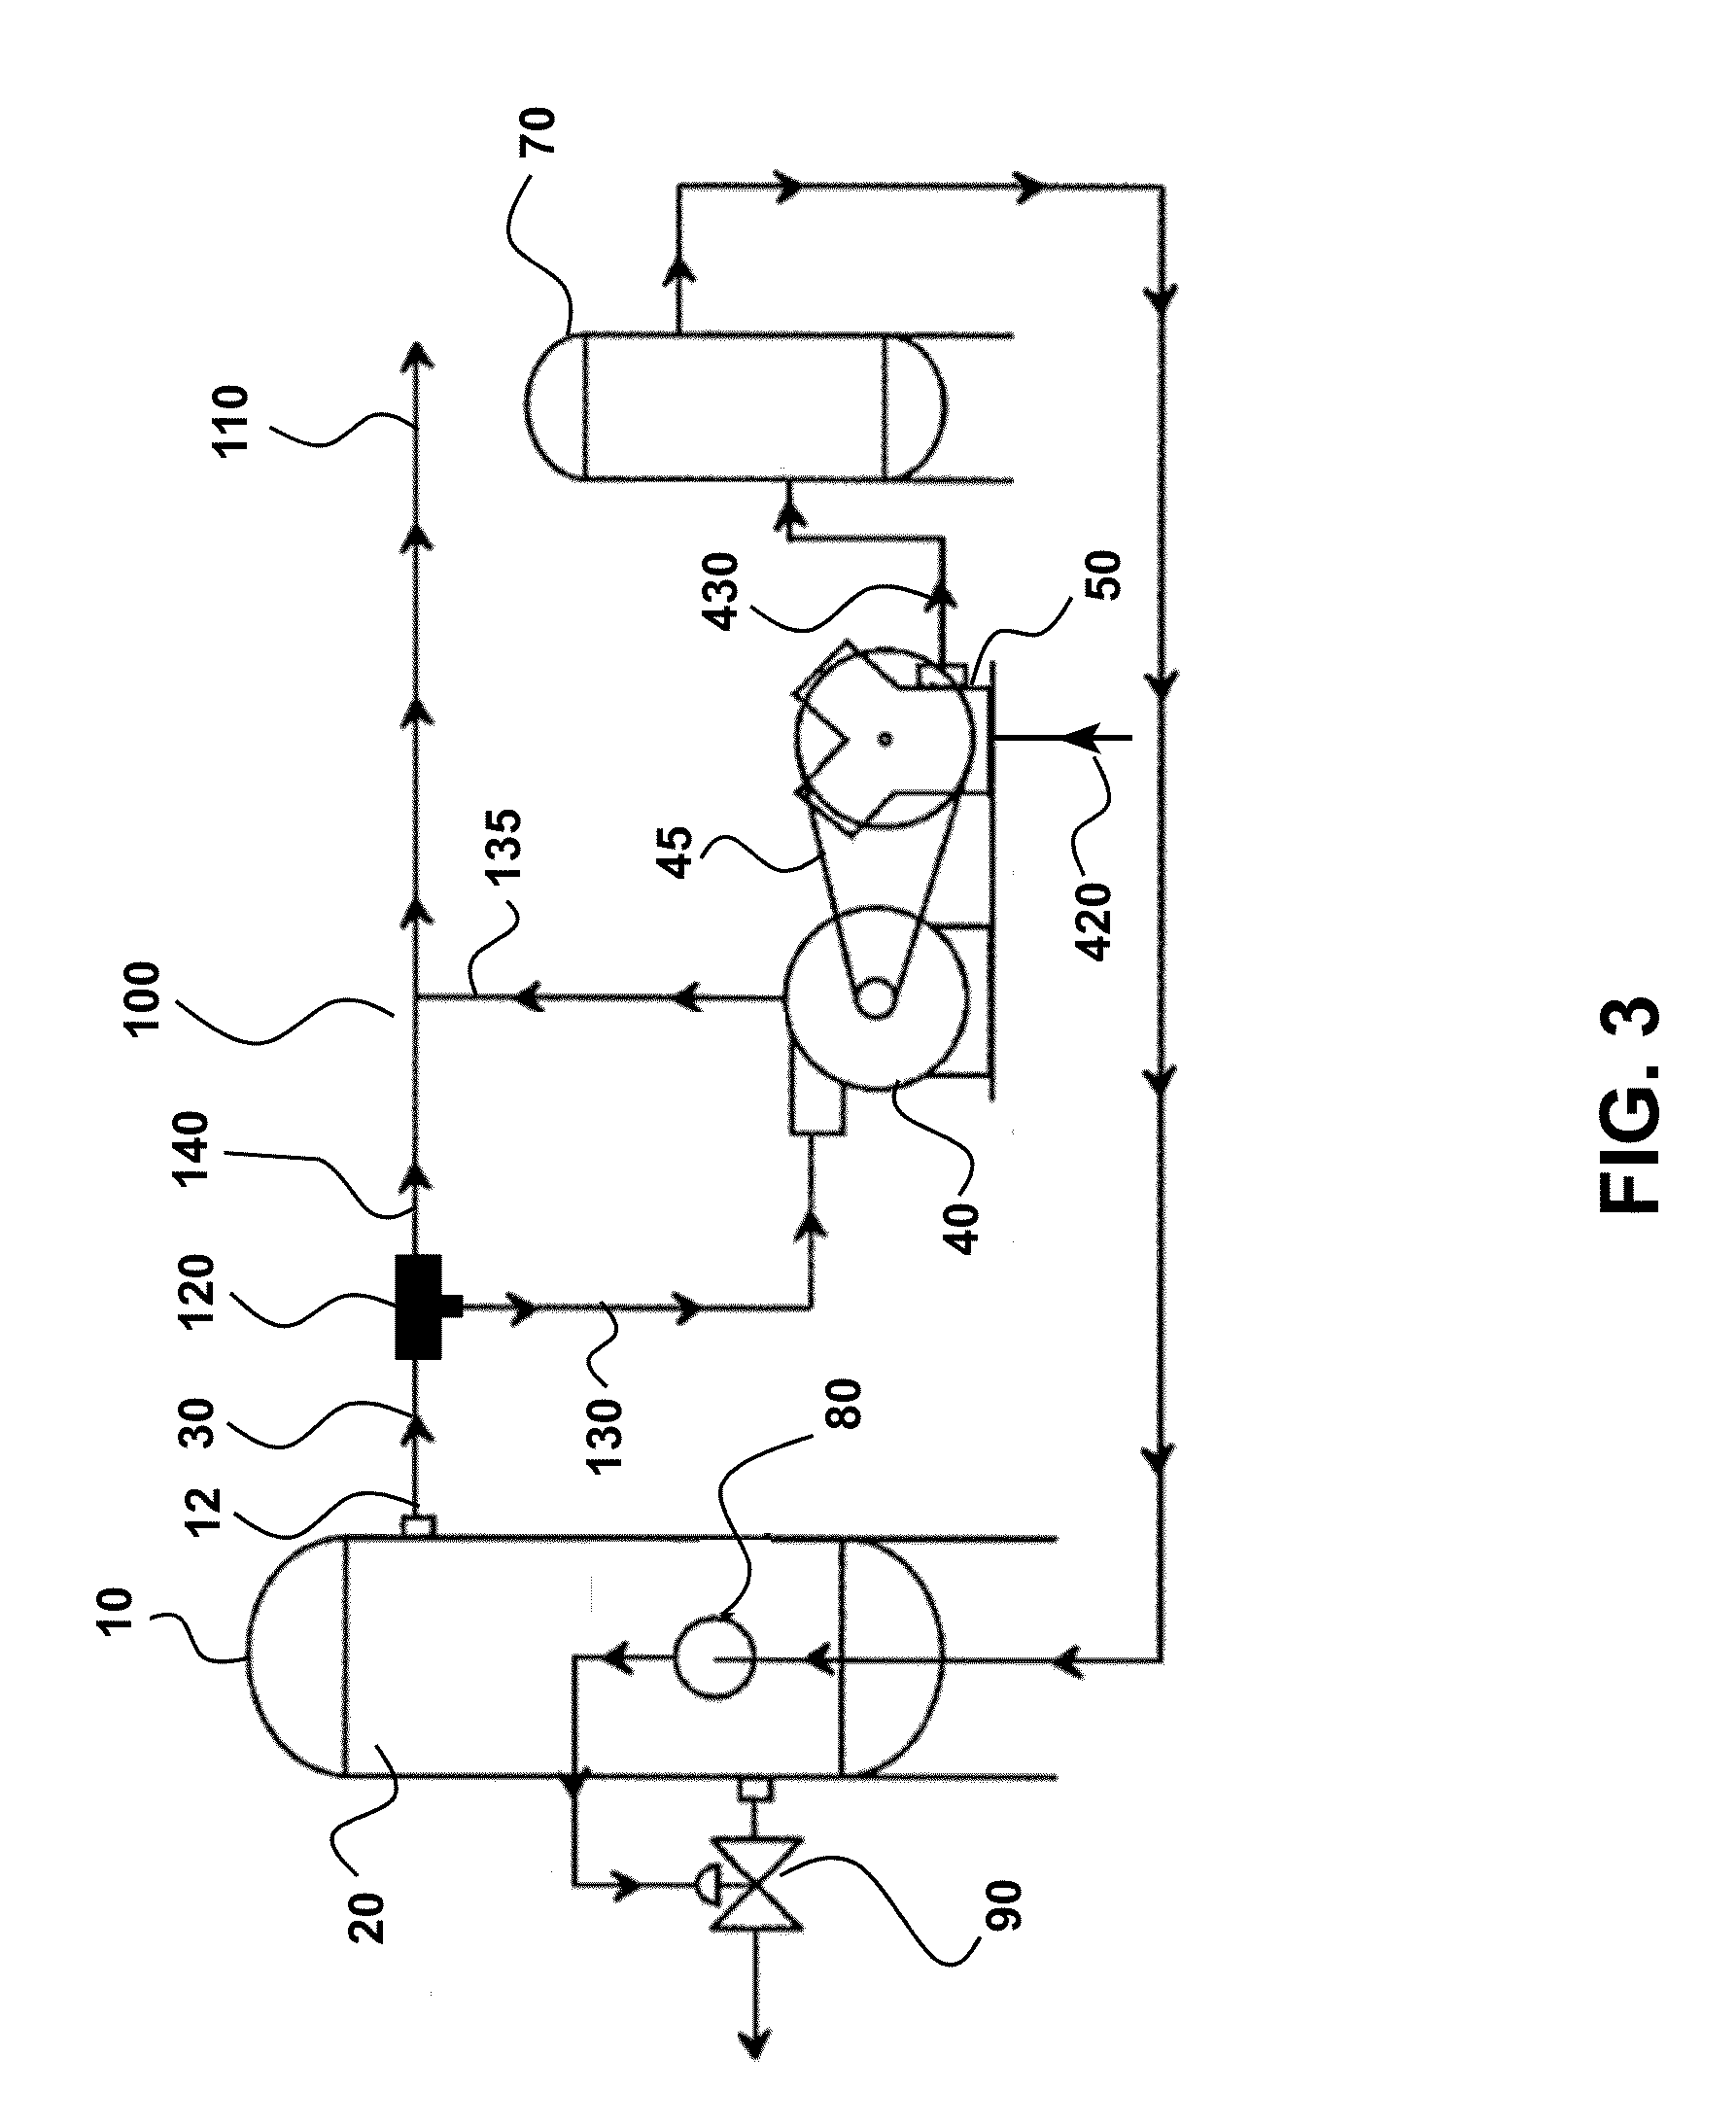 Boundary Layer Disk Turbine Systems for Controlling Pneumatic Devices